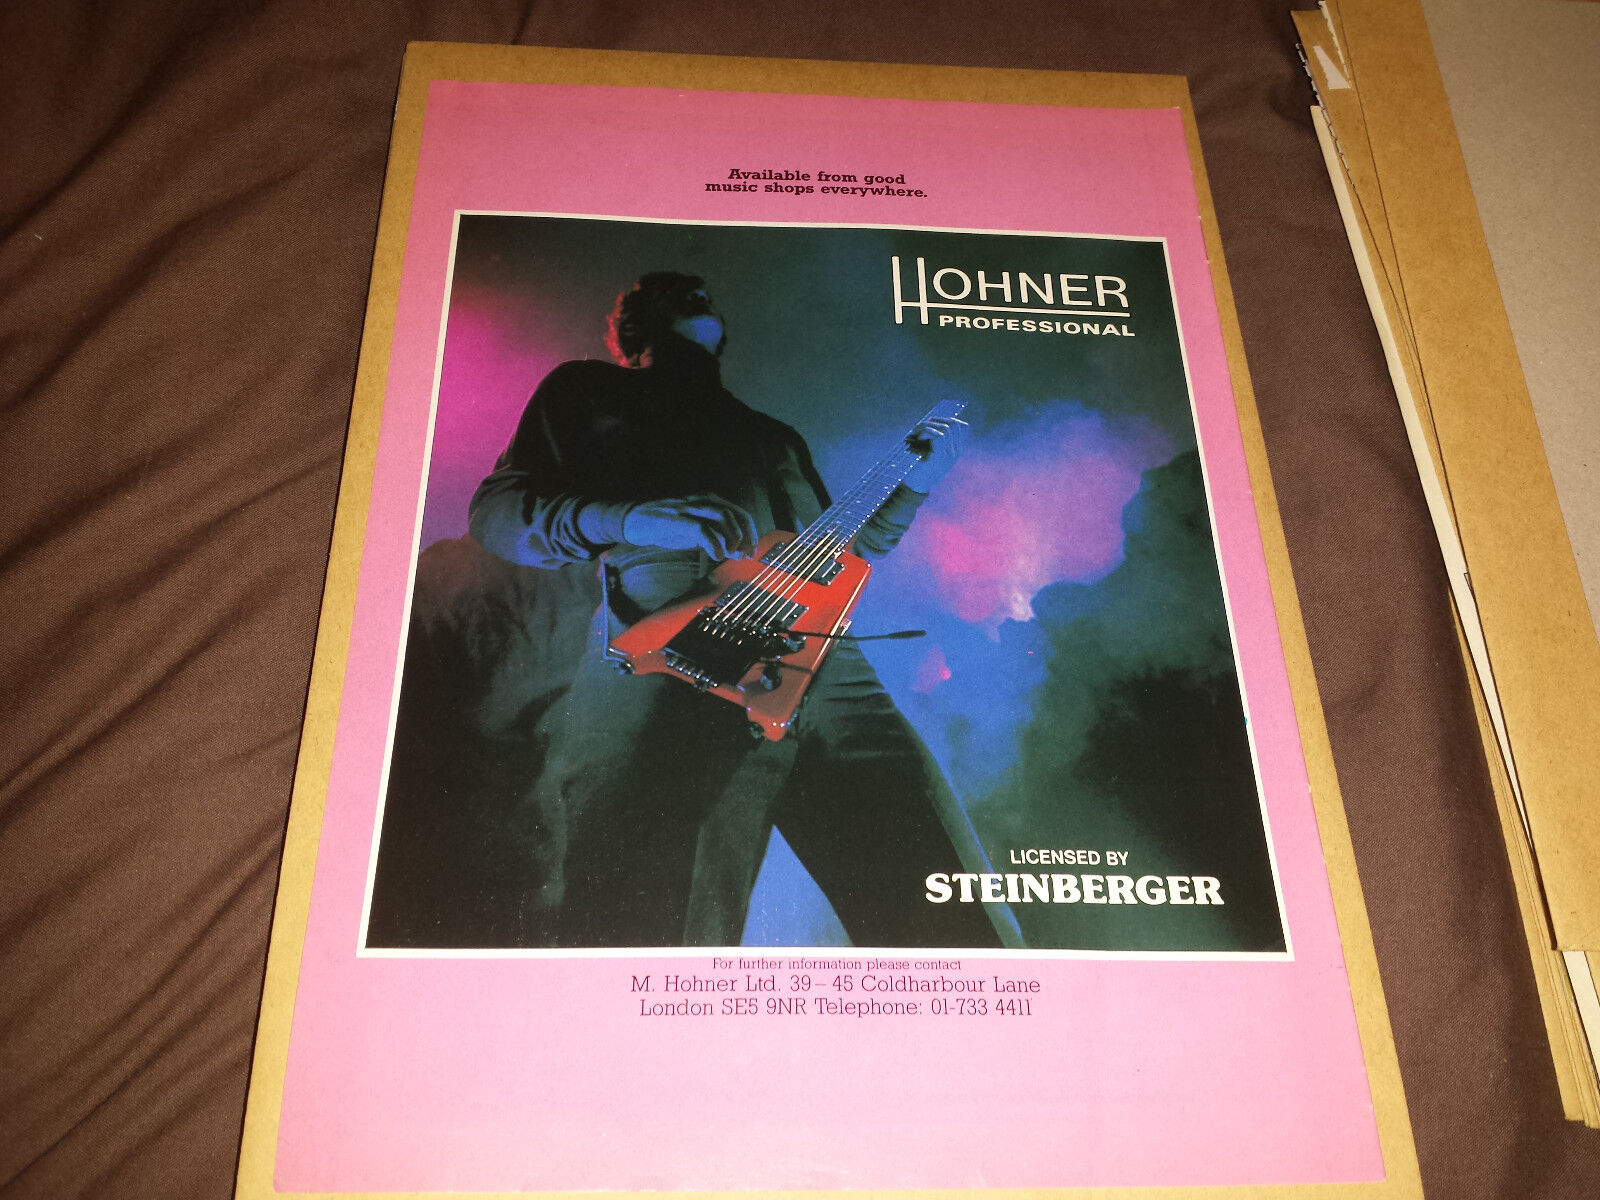 Hohner Professional Guitars - by Steinberger - 80's Magazine Retro Poster Art